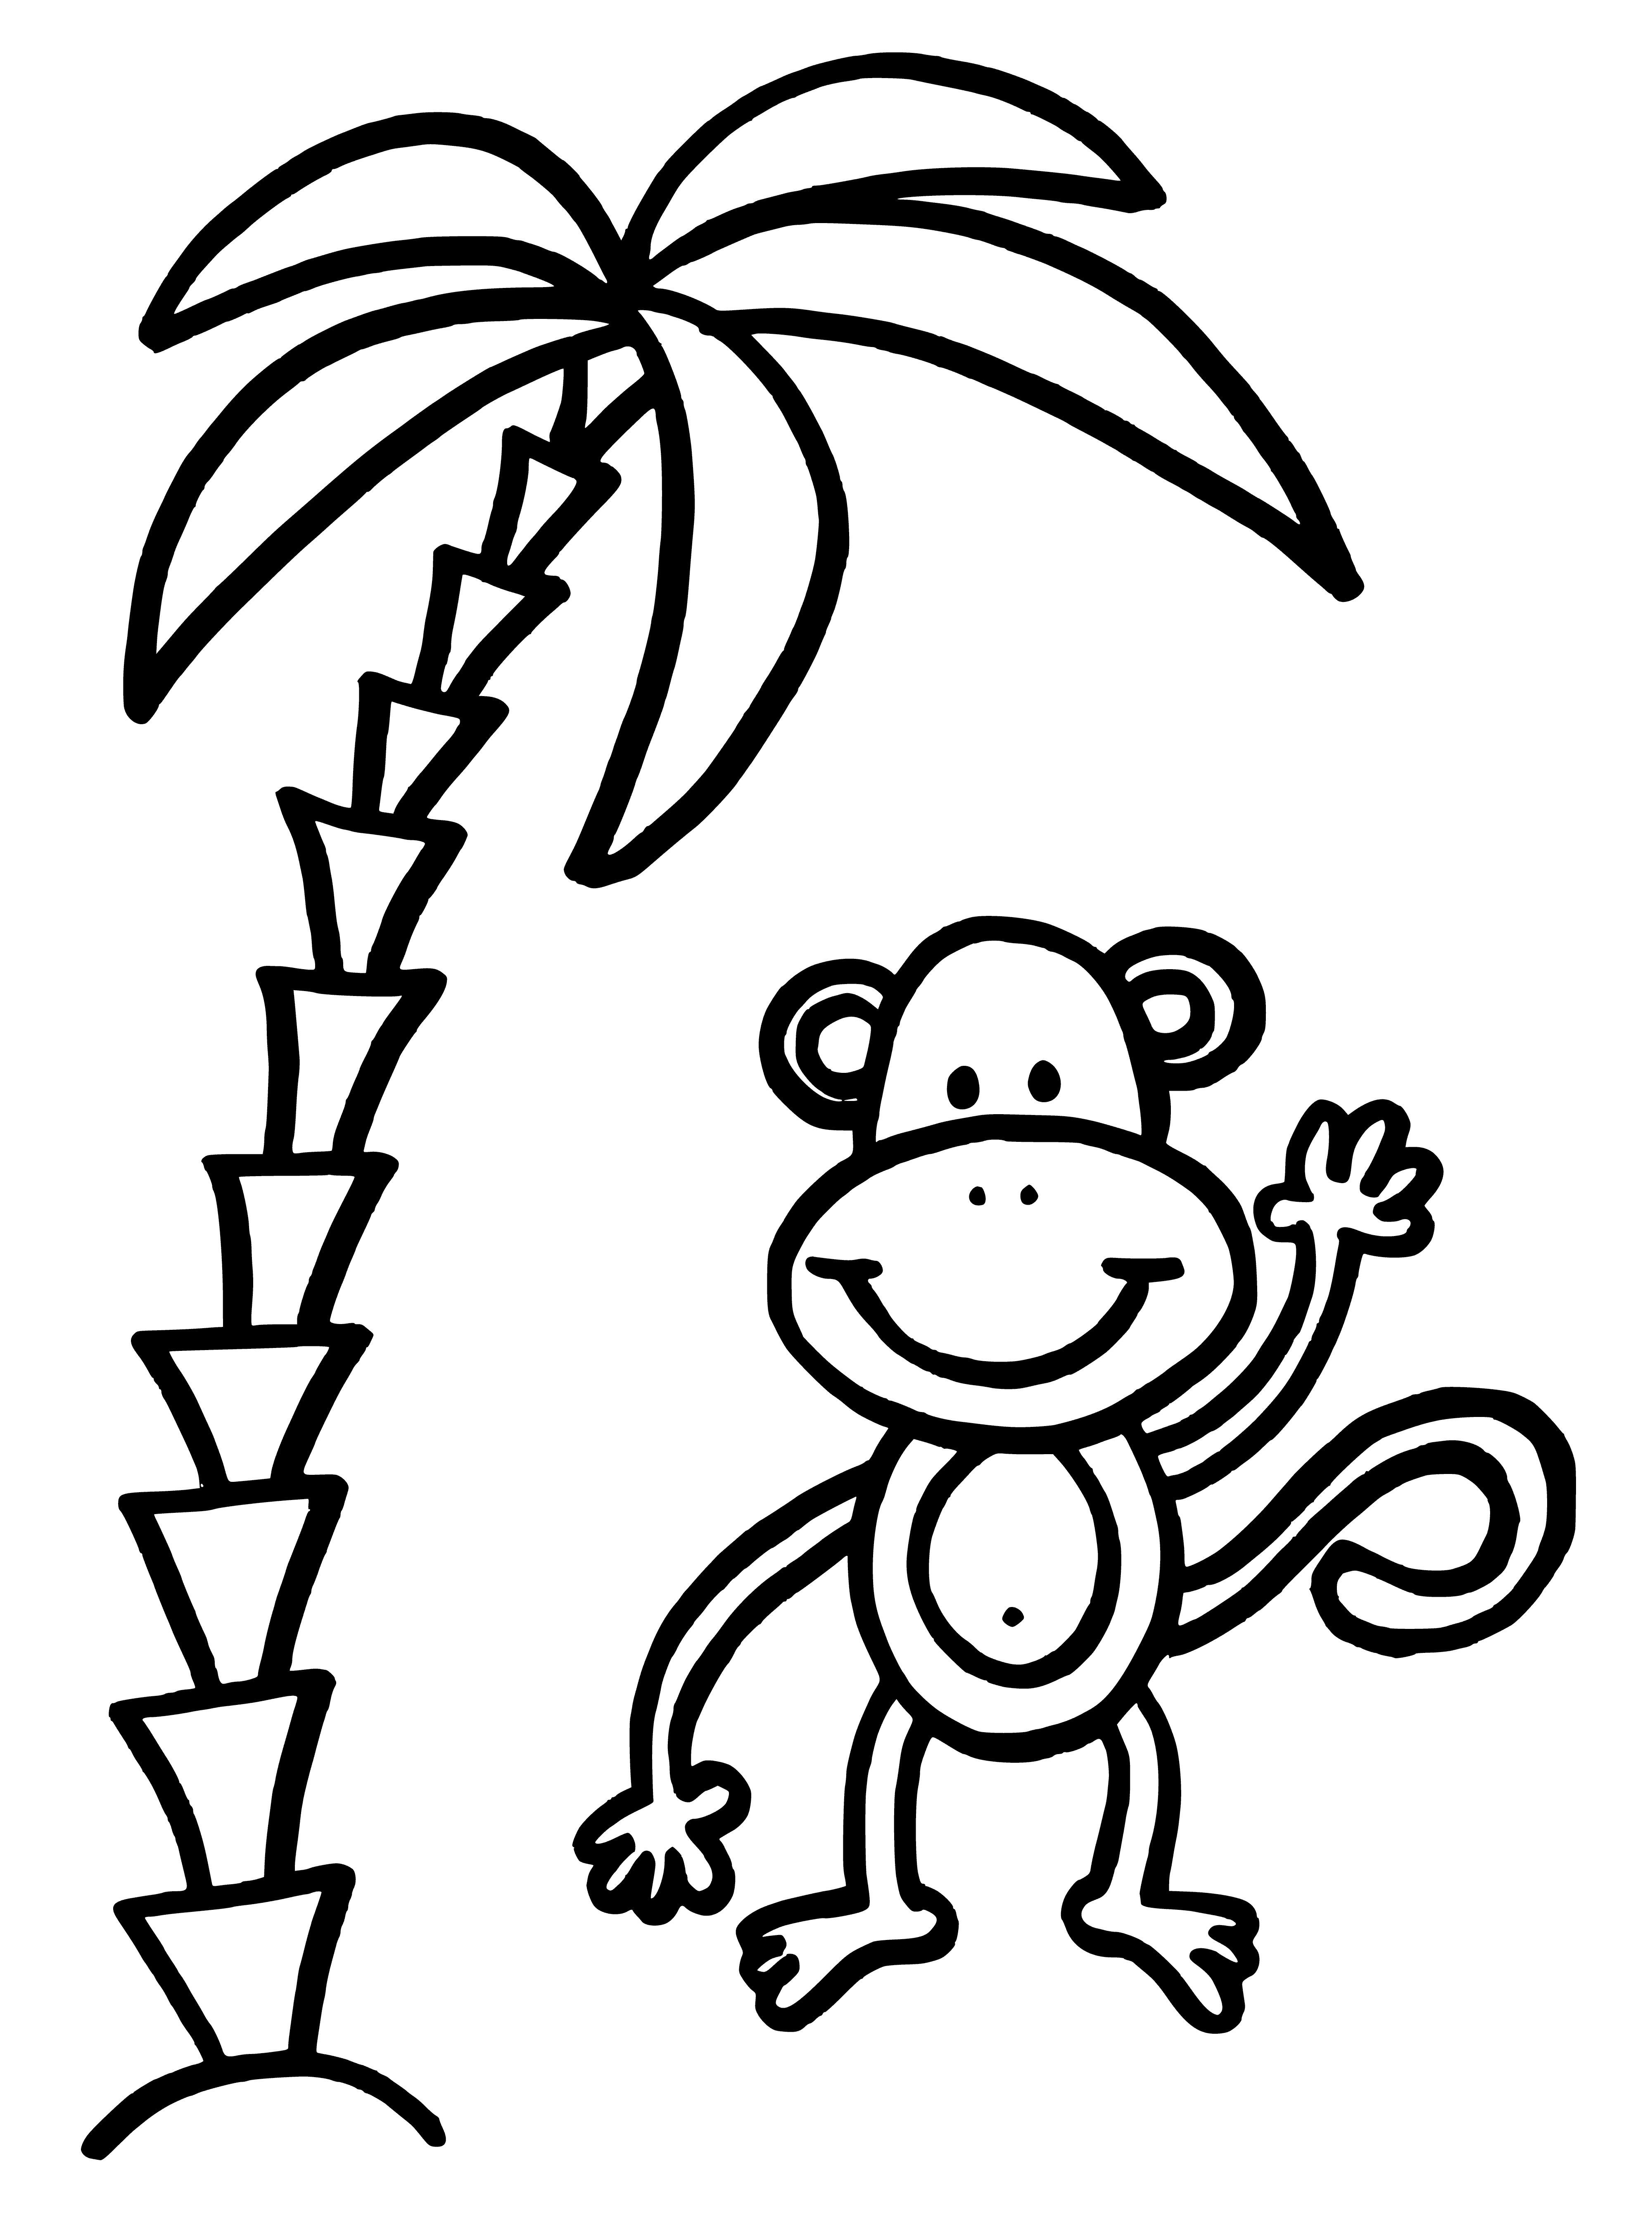 coloring page: A monkey near a palm tree is sitting on the ground, having leaves and trunk.